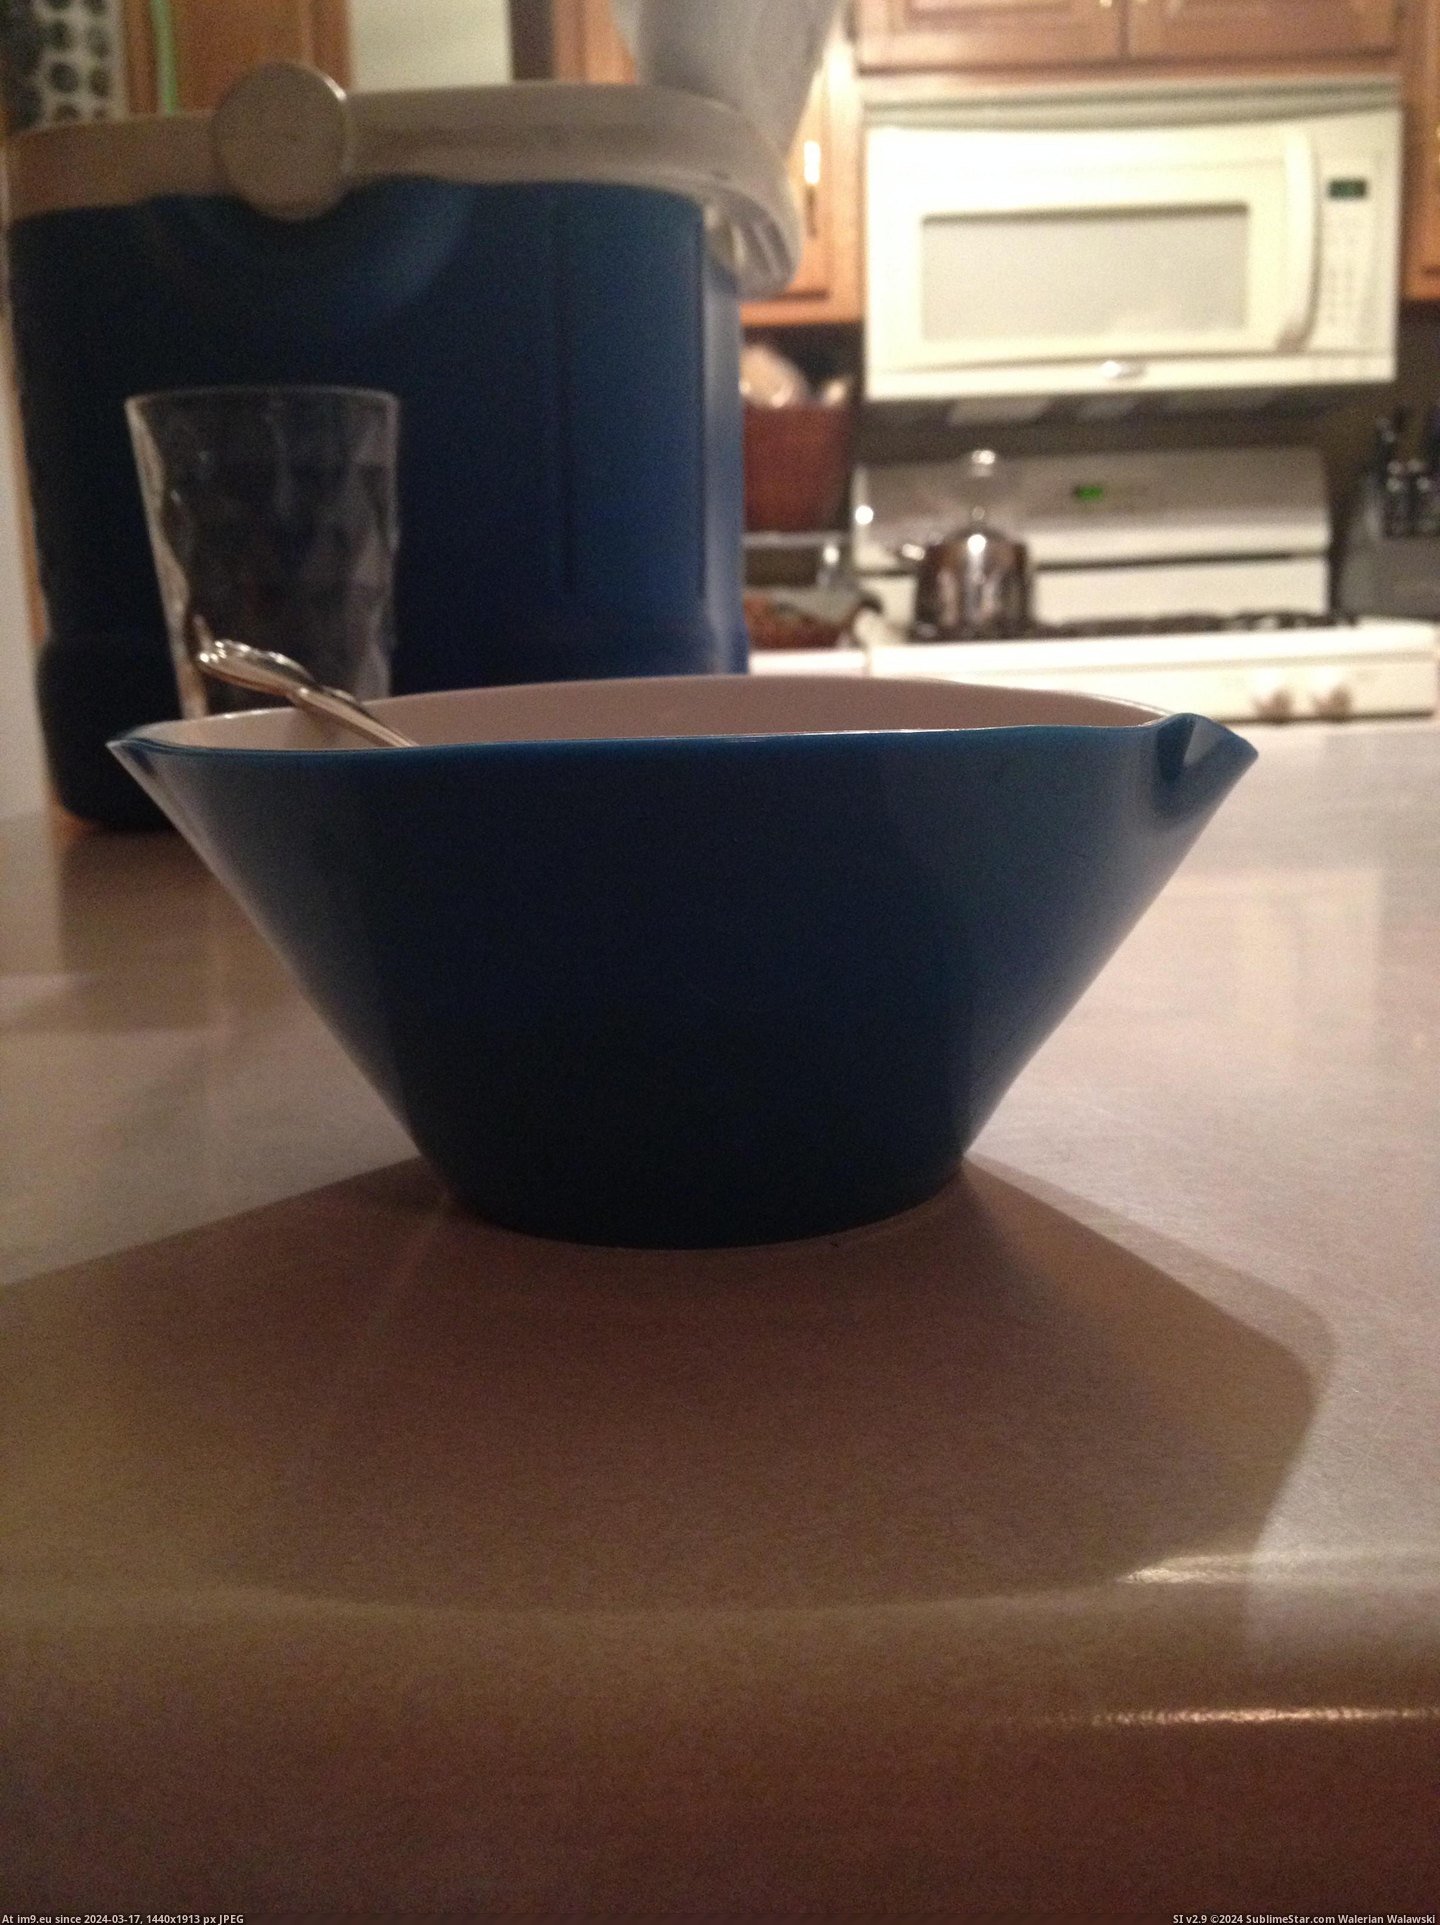 #Was #Perfect #Bowl #Spot #Circular #Sipping #Reformed #Shape #Cereal #Soo #Dishwasher [Mildlyinteresting] Soo my cereal bowl, normally circular in shape, was reformed by my dishwasher to make a perfect sipping spot Pic. (Bild von album My r/MILDLYINTERESTING favs))